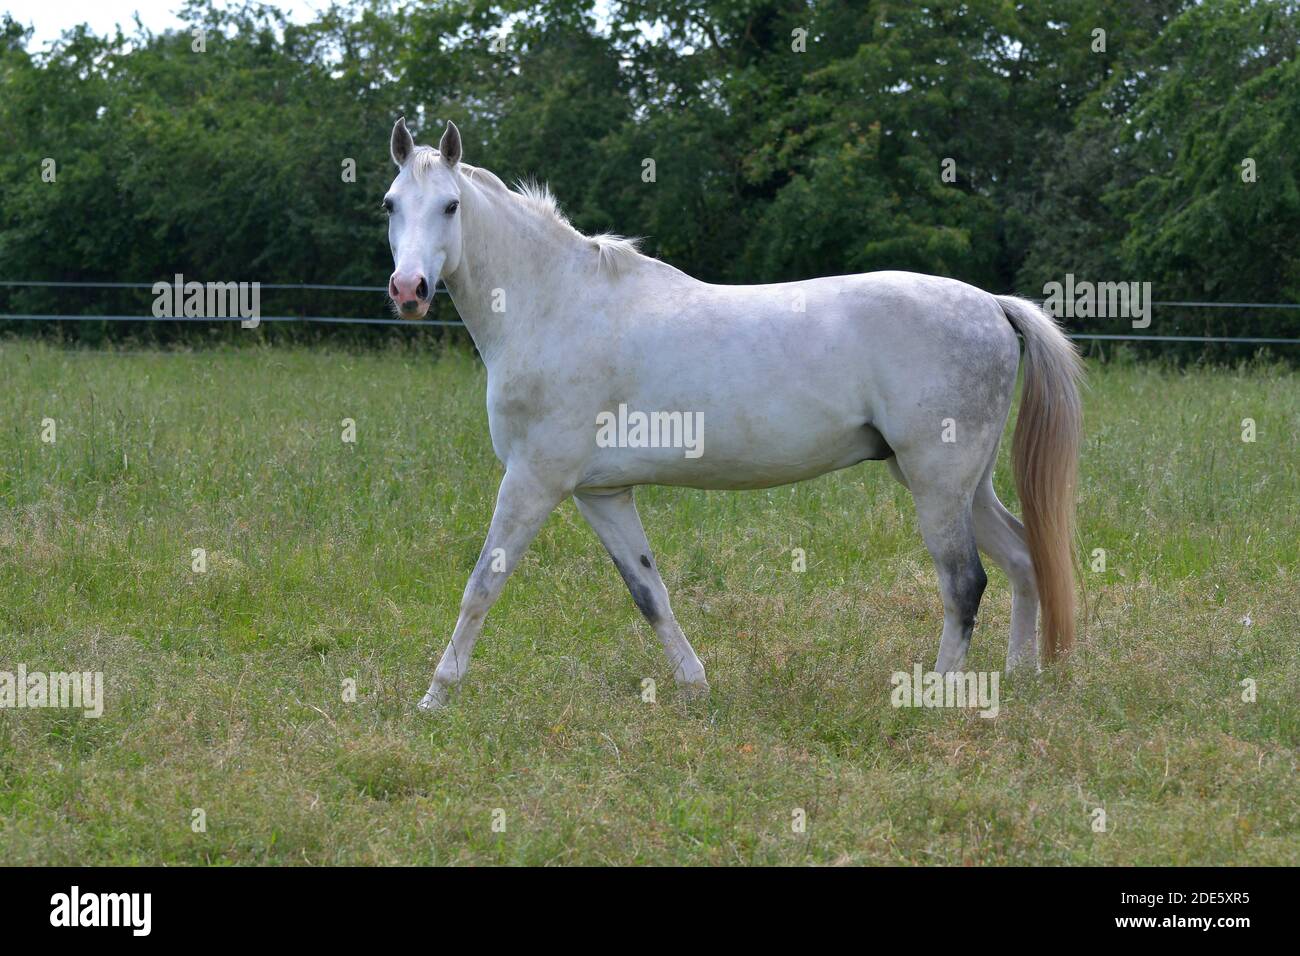 A beautiful gray warmblood horse walking in a meadow, looking to the photographer. Stock Photo